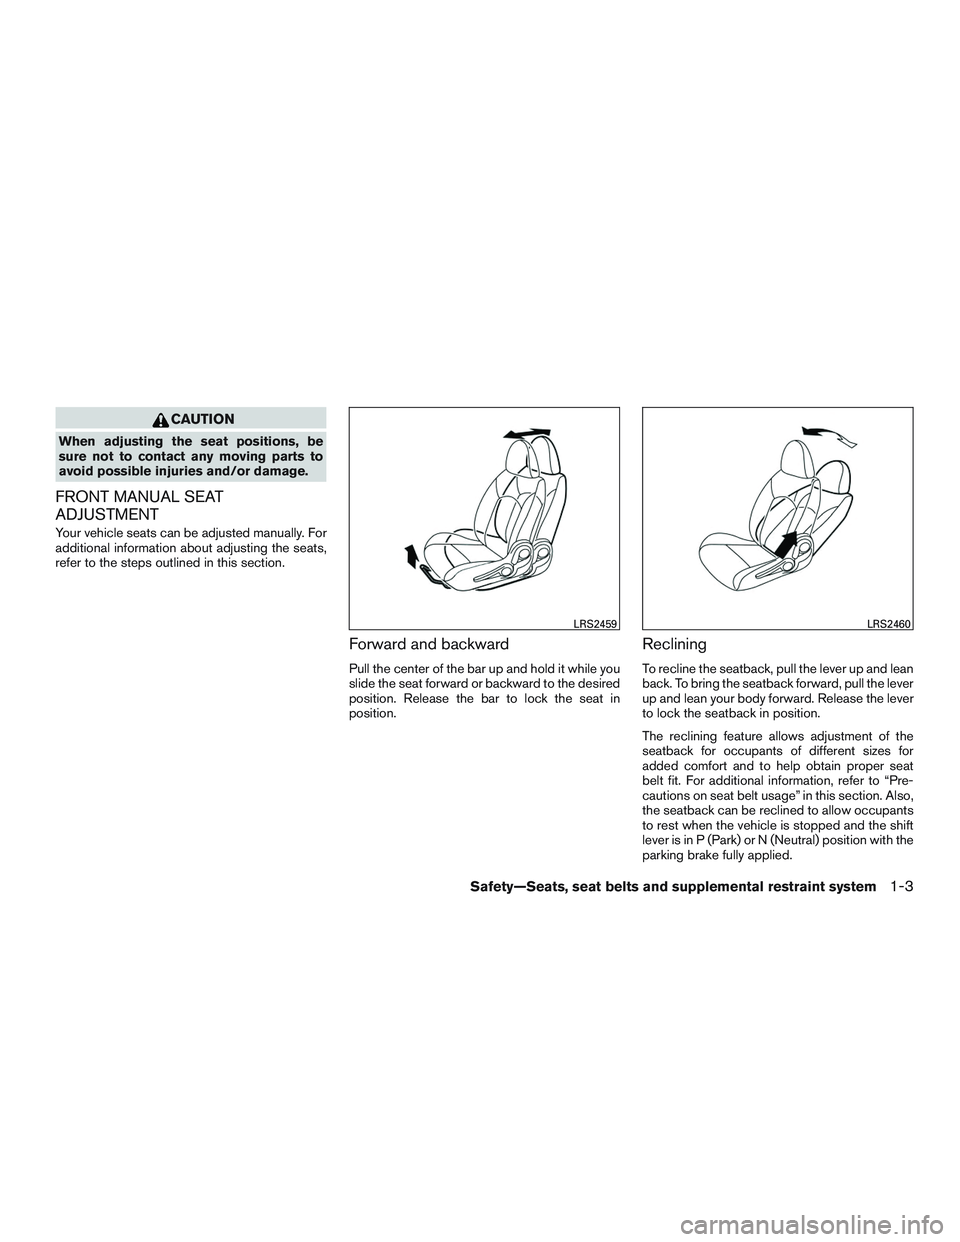 NISSAN MICRA 2016  Owner´s Manual CAUTION
When adjusting the seat positions, be
sure not to contact any moving parts to
avoid possible injuries and/or damage.
FRONT MANUAL SEAT
ADJUSTMENT
Your vehicle seats can be adjusted manually. F